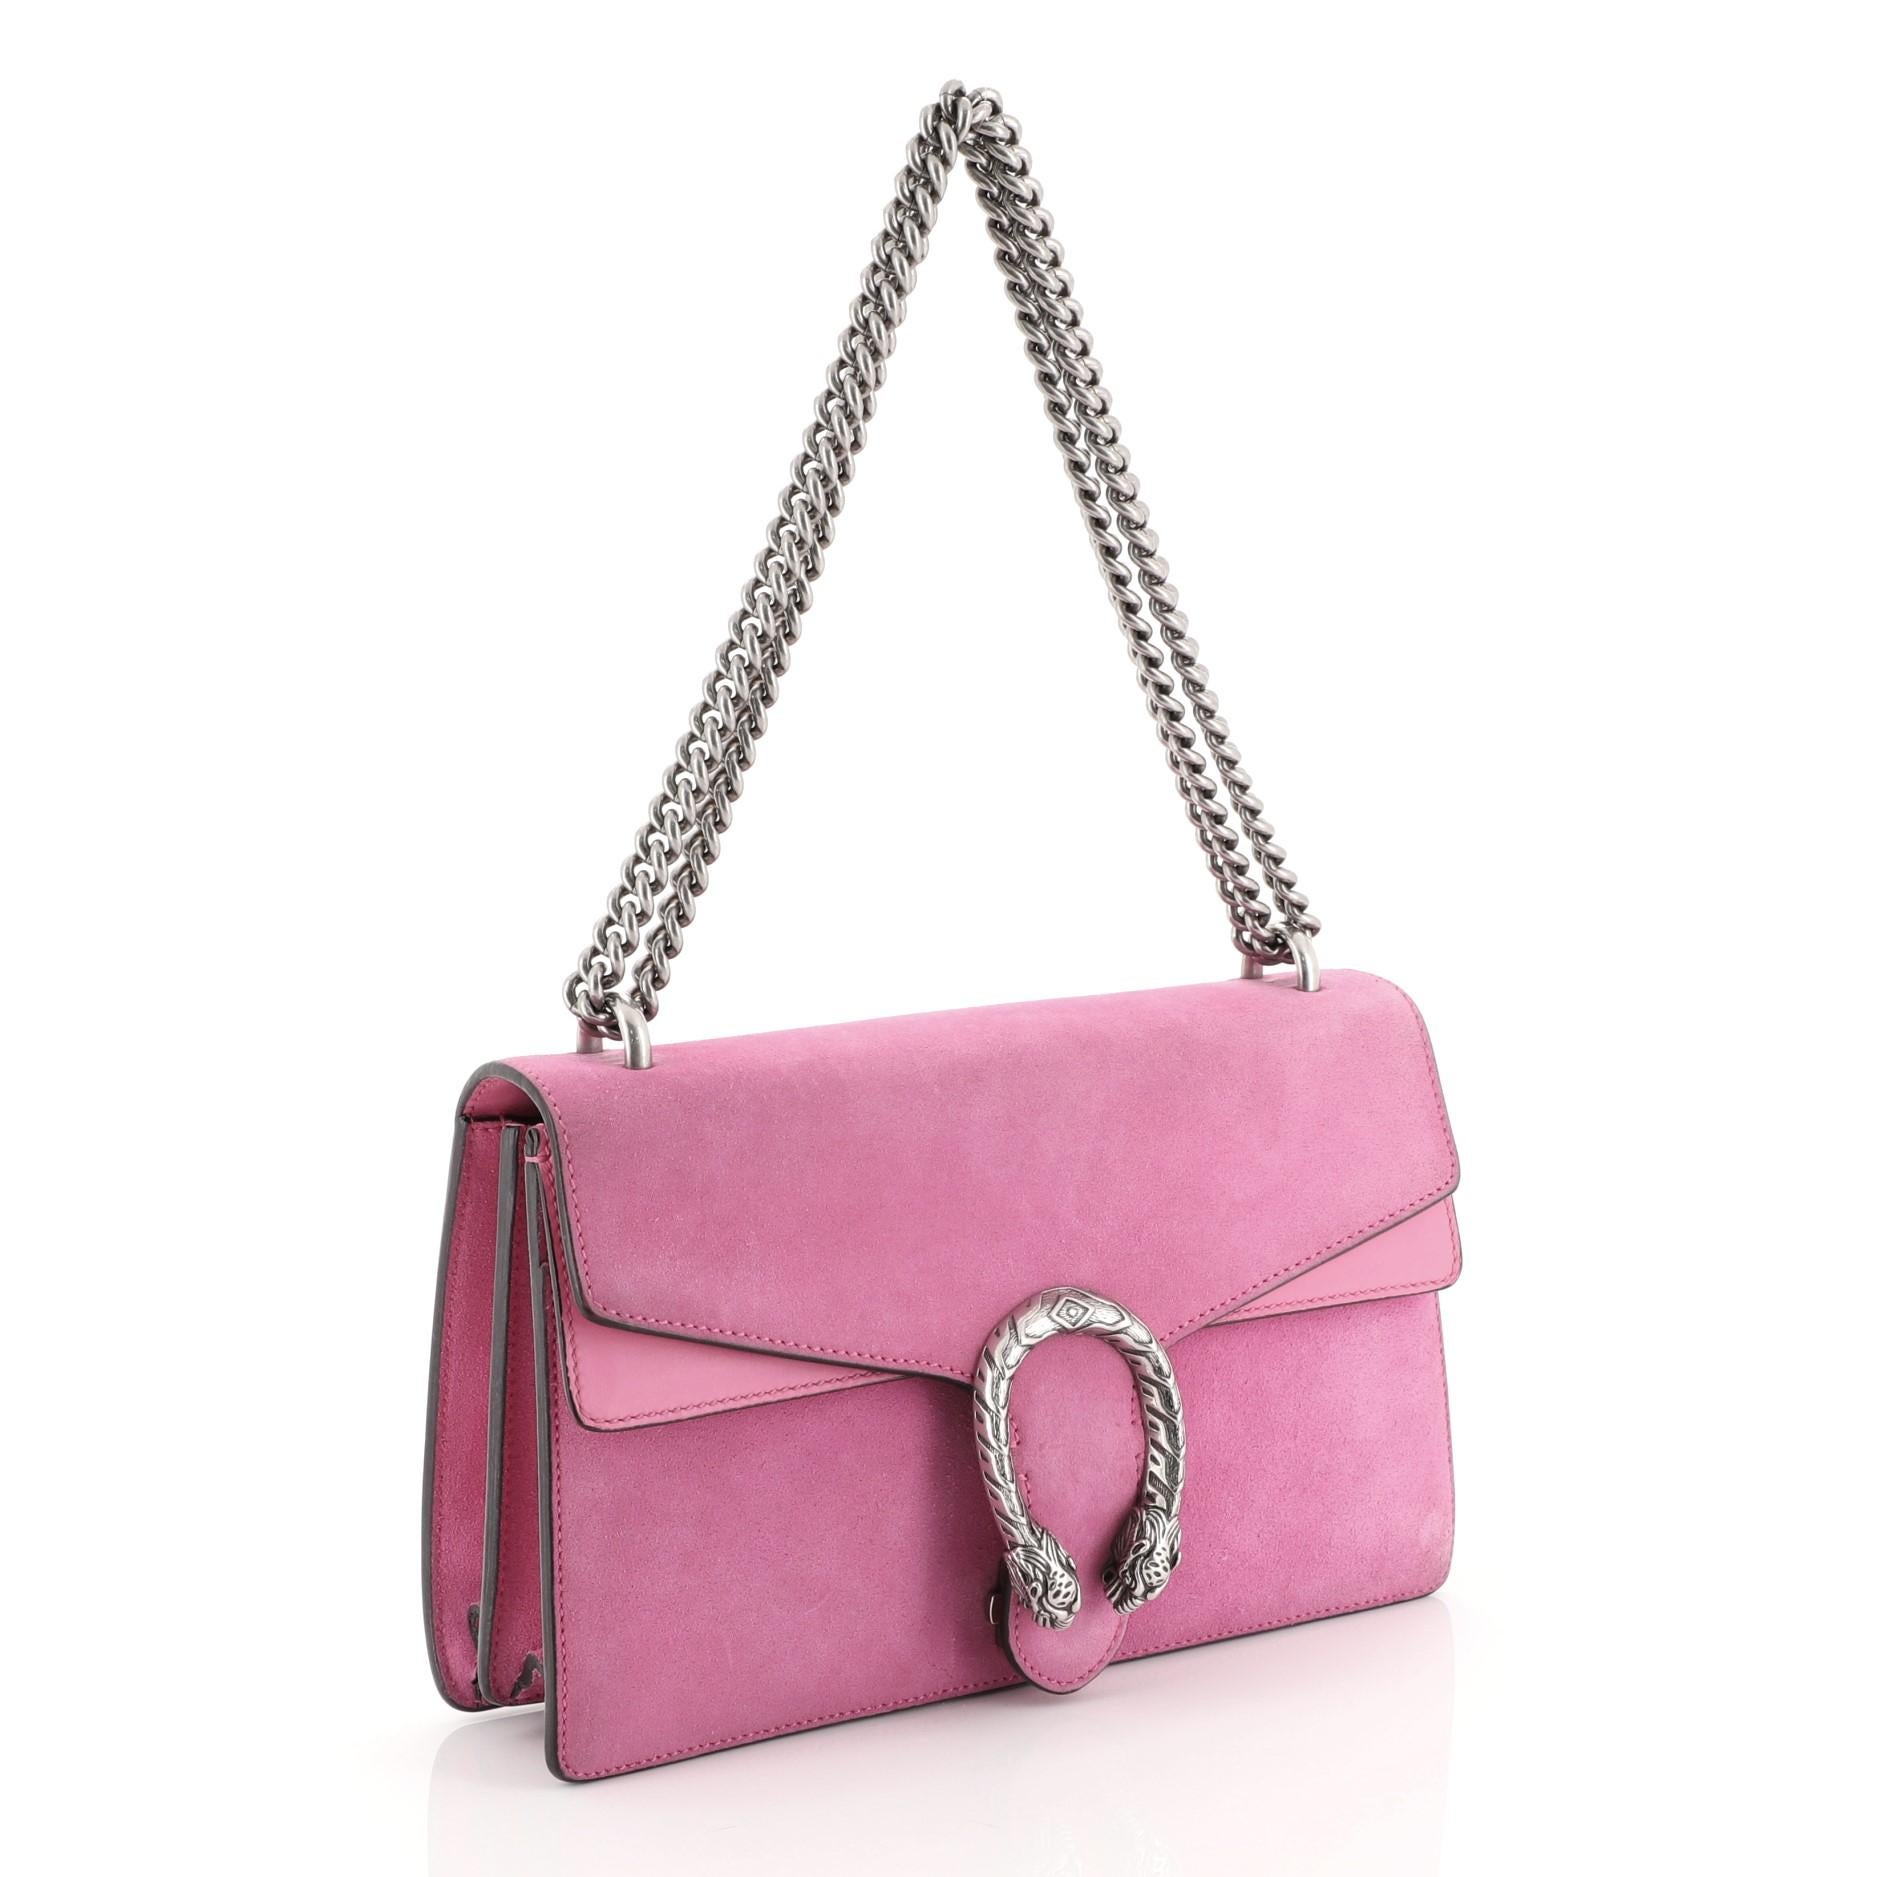 This Gucci Dionysus Bag Suede Small, crafted from pink suede, features a chain link strap, embellished tiger head spur detail on its flap, accordion-like gusseted sides, and aged silver-tone hardware. Its hidden push-pin closure opens to a pink